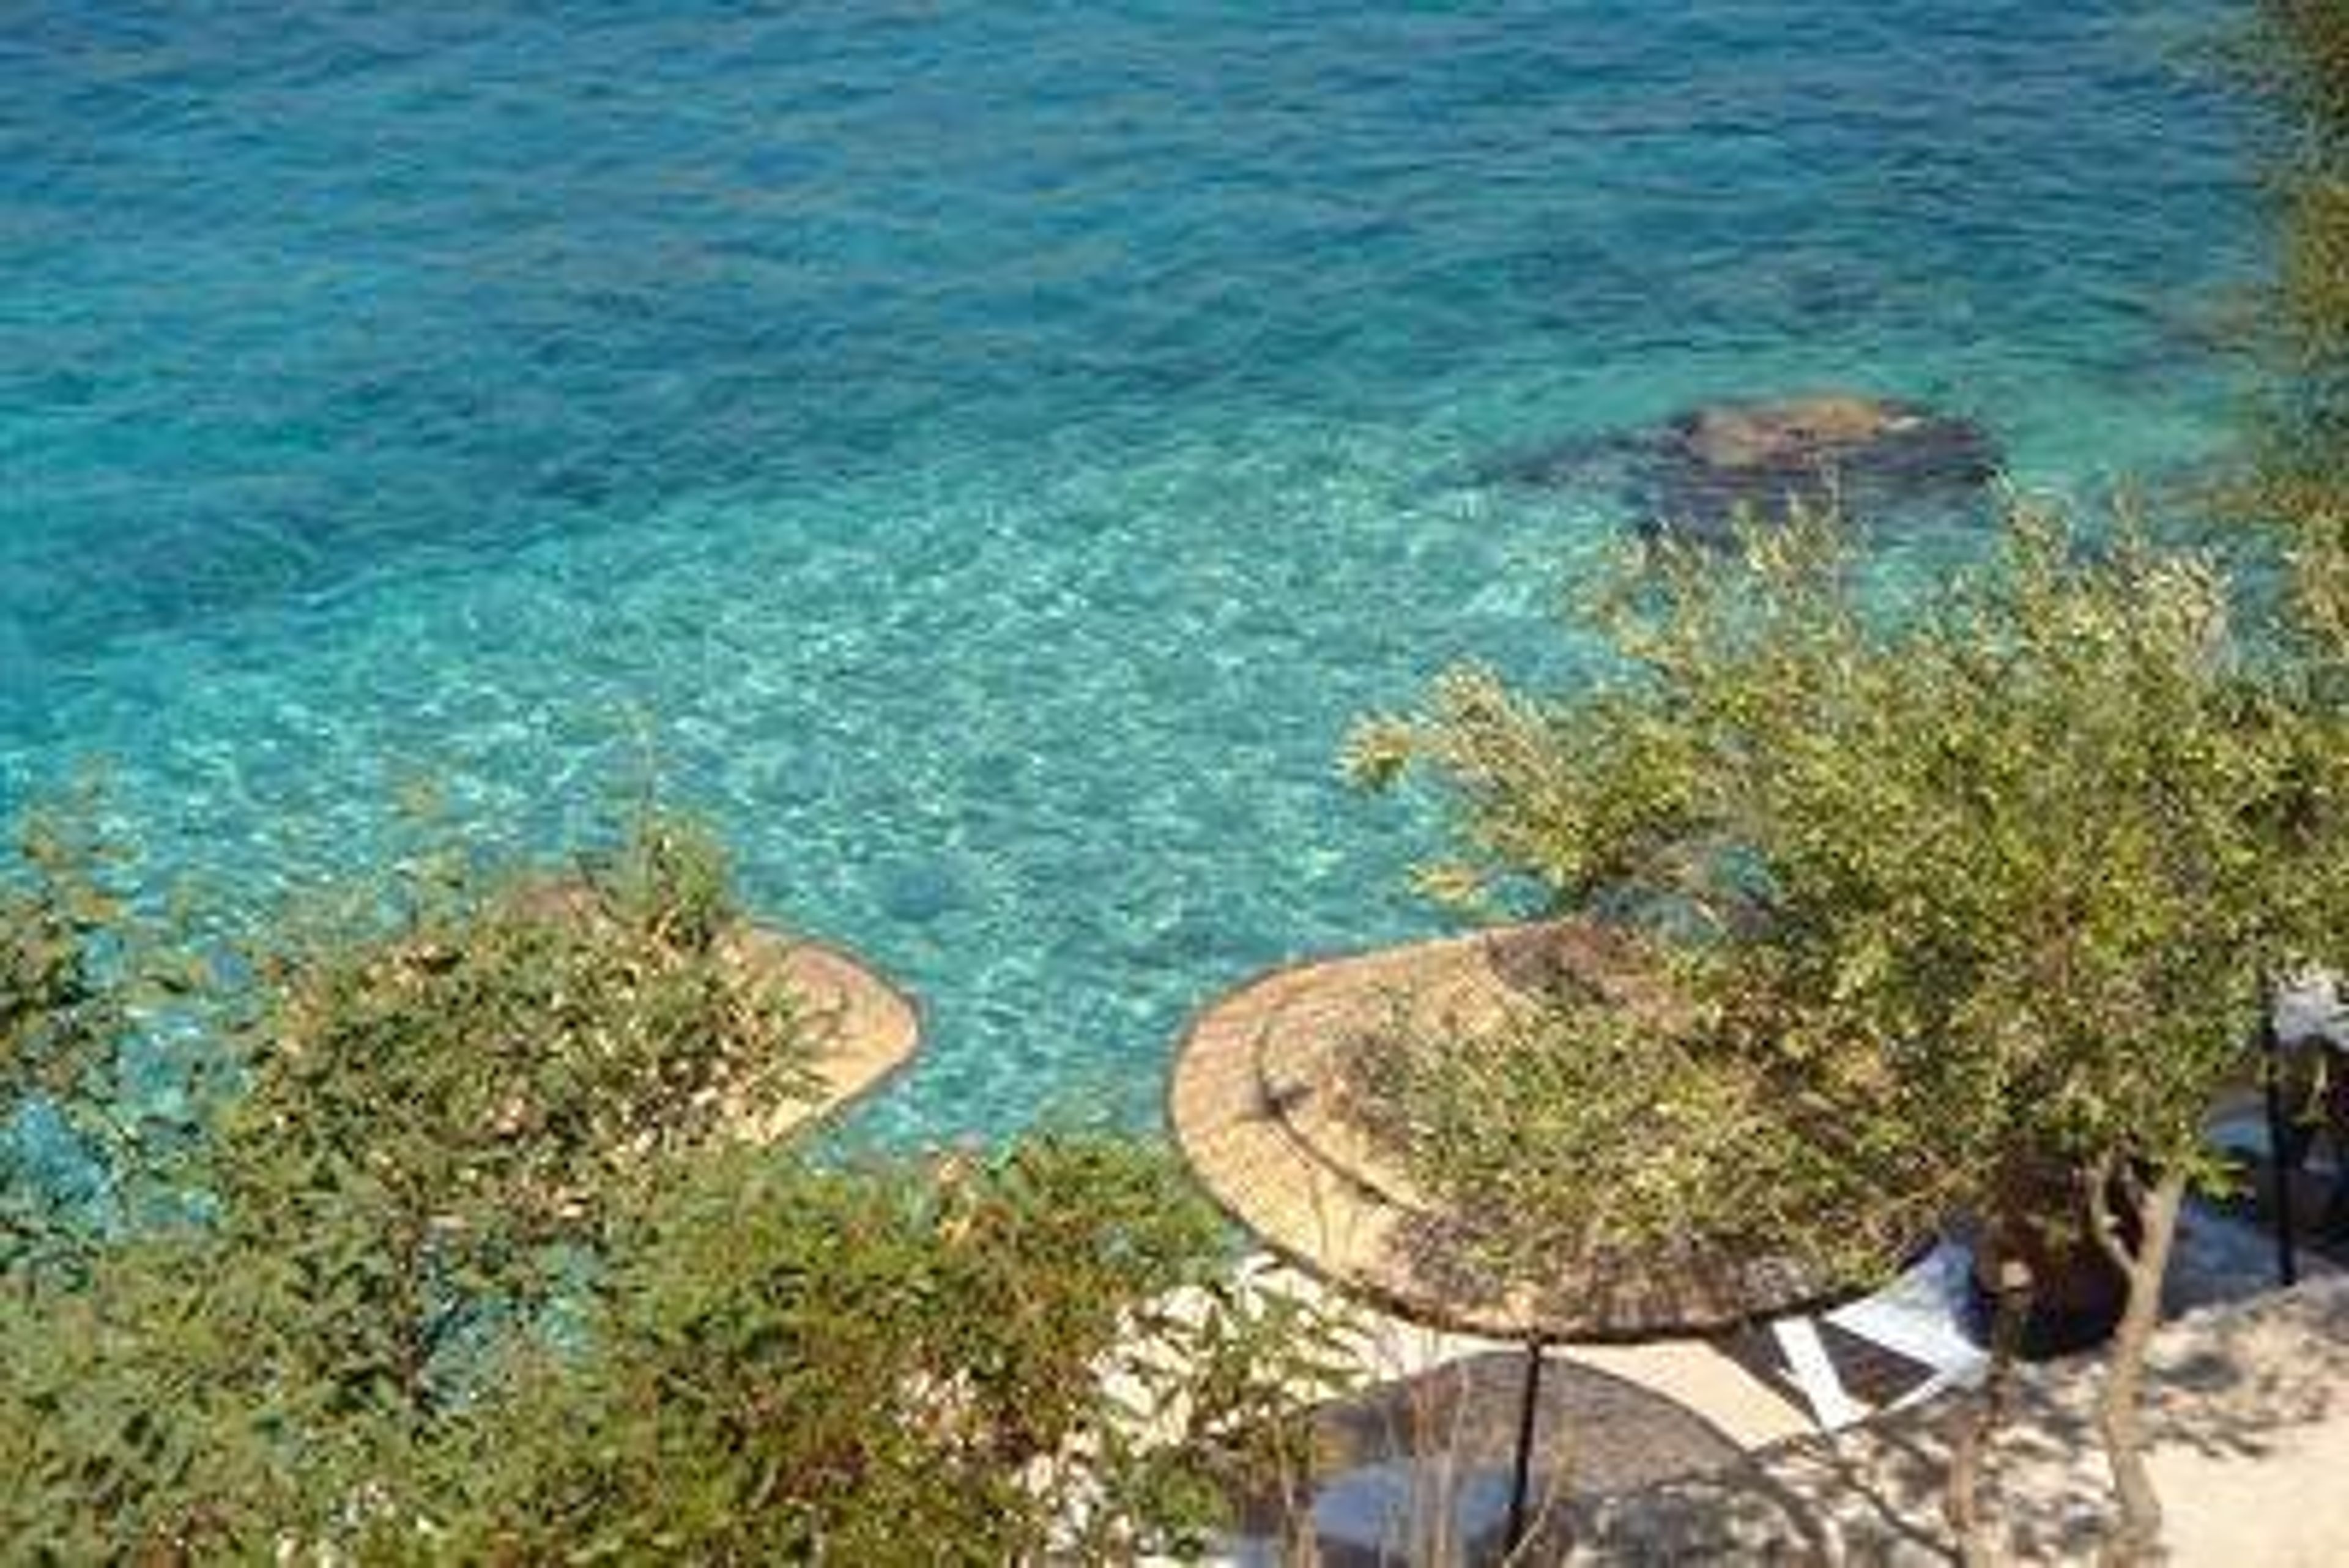 Dive into the crystal waters of the Mediterranean